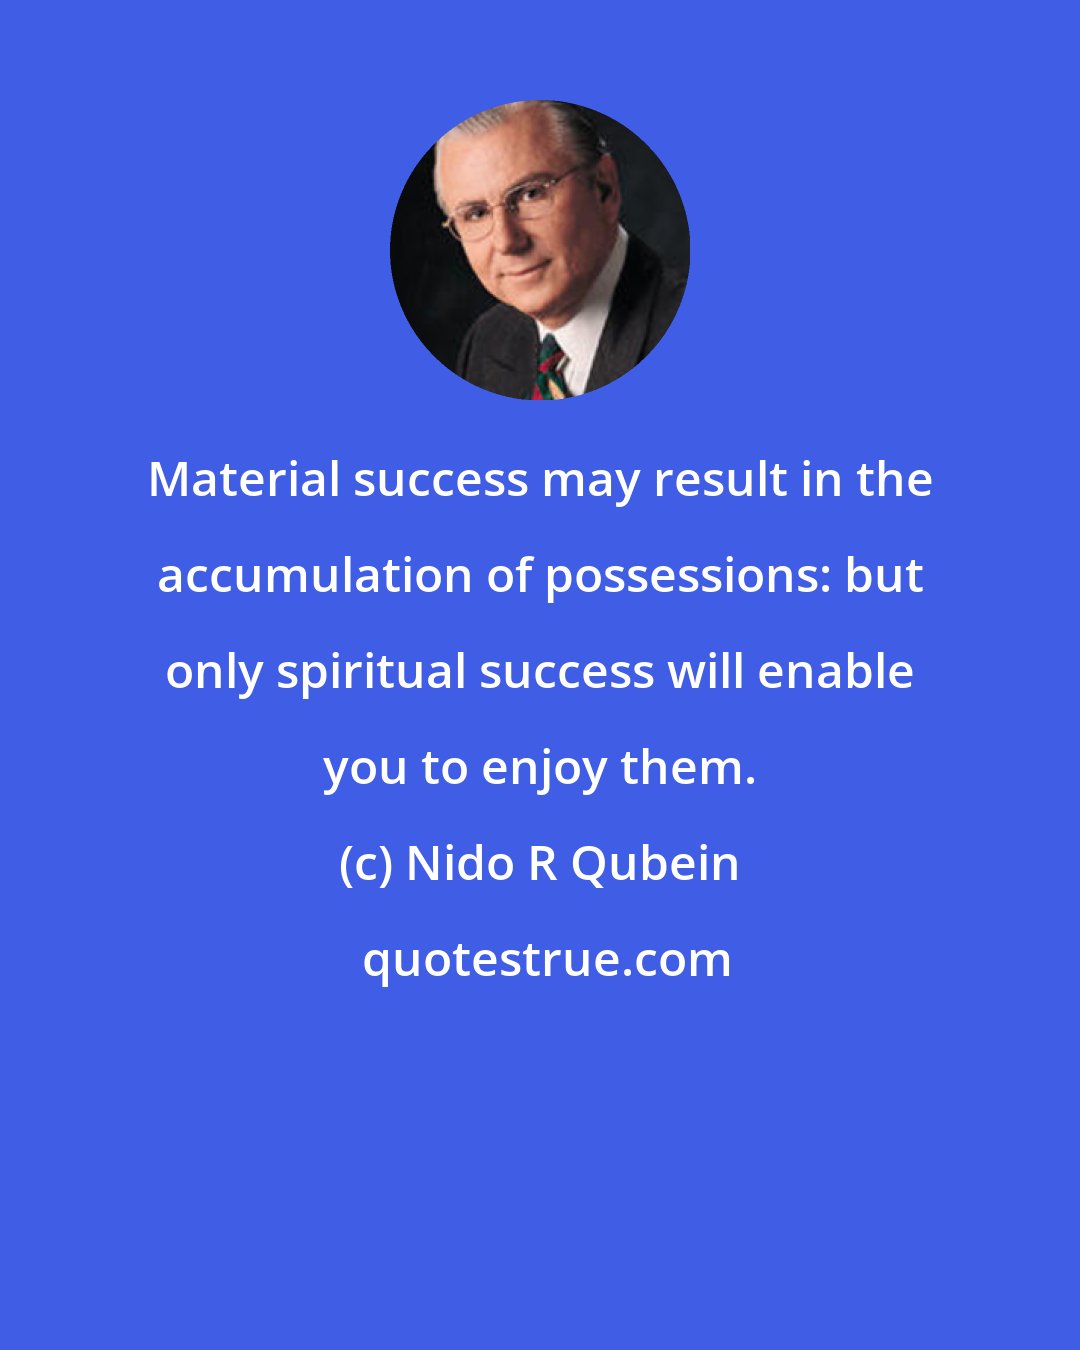 Nido R Qubein: Material success may result in the accumulation of possessions: but only spiritual success will enable you to enjoy them.